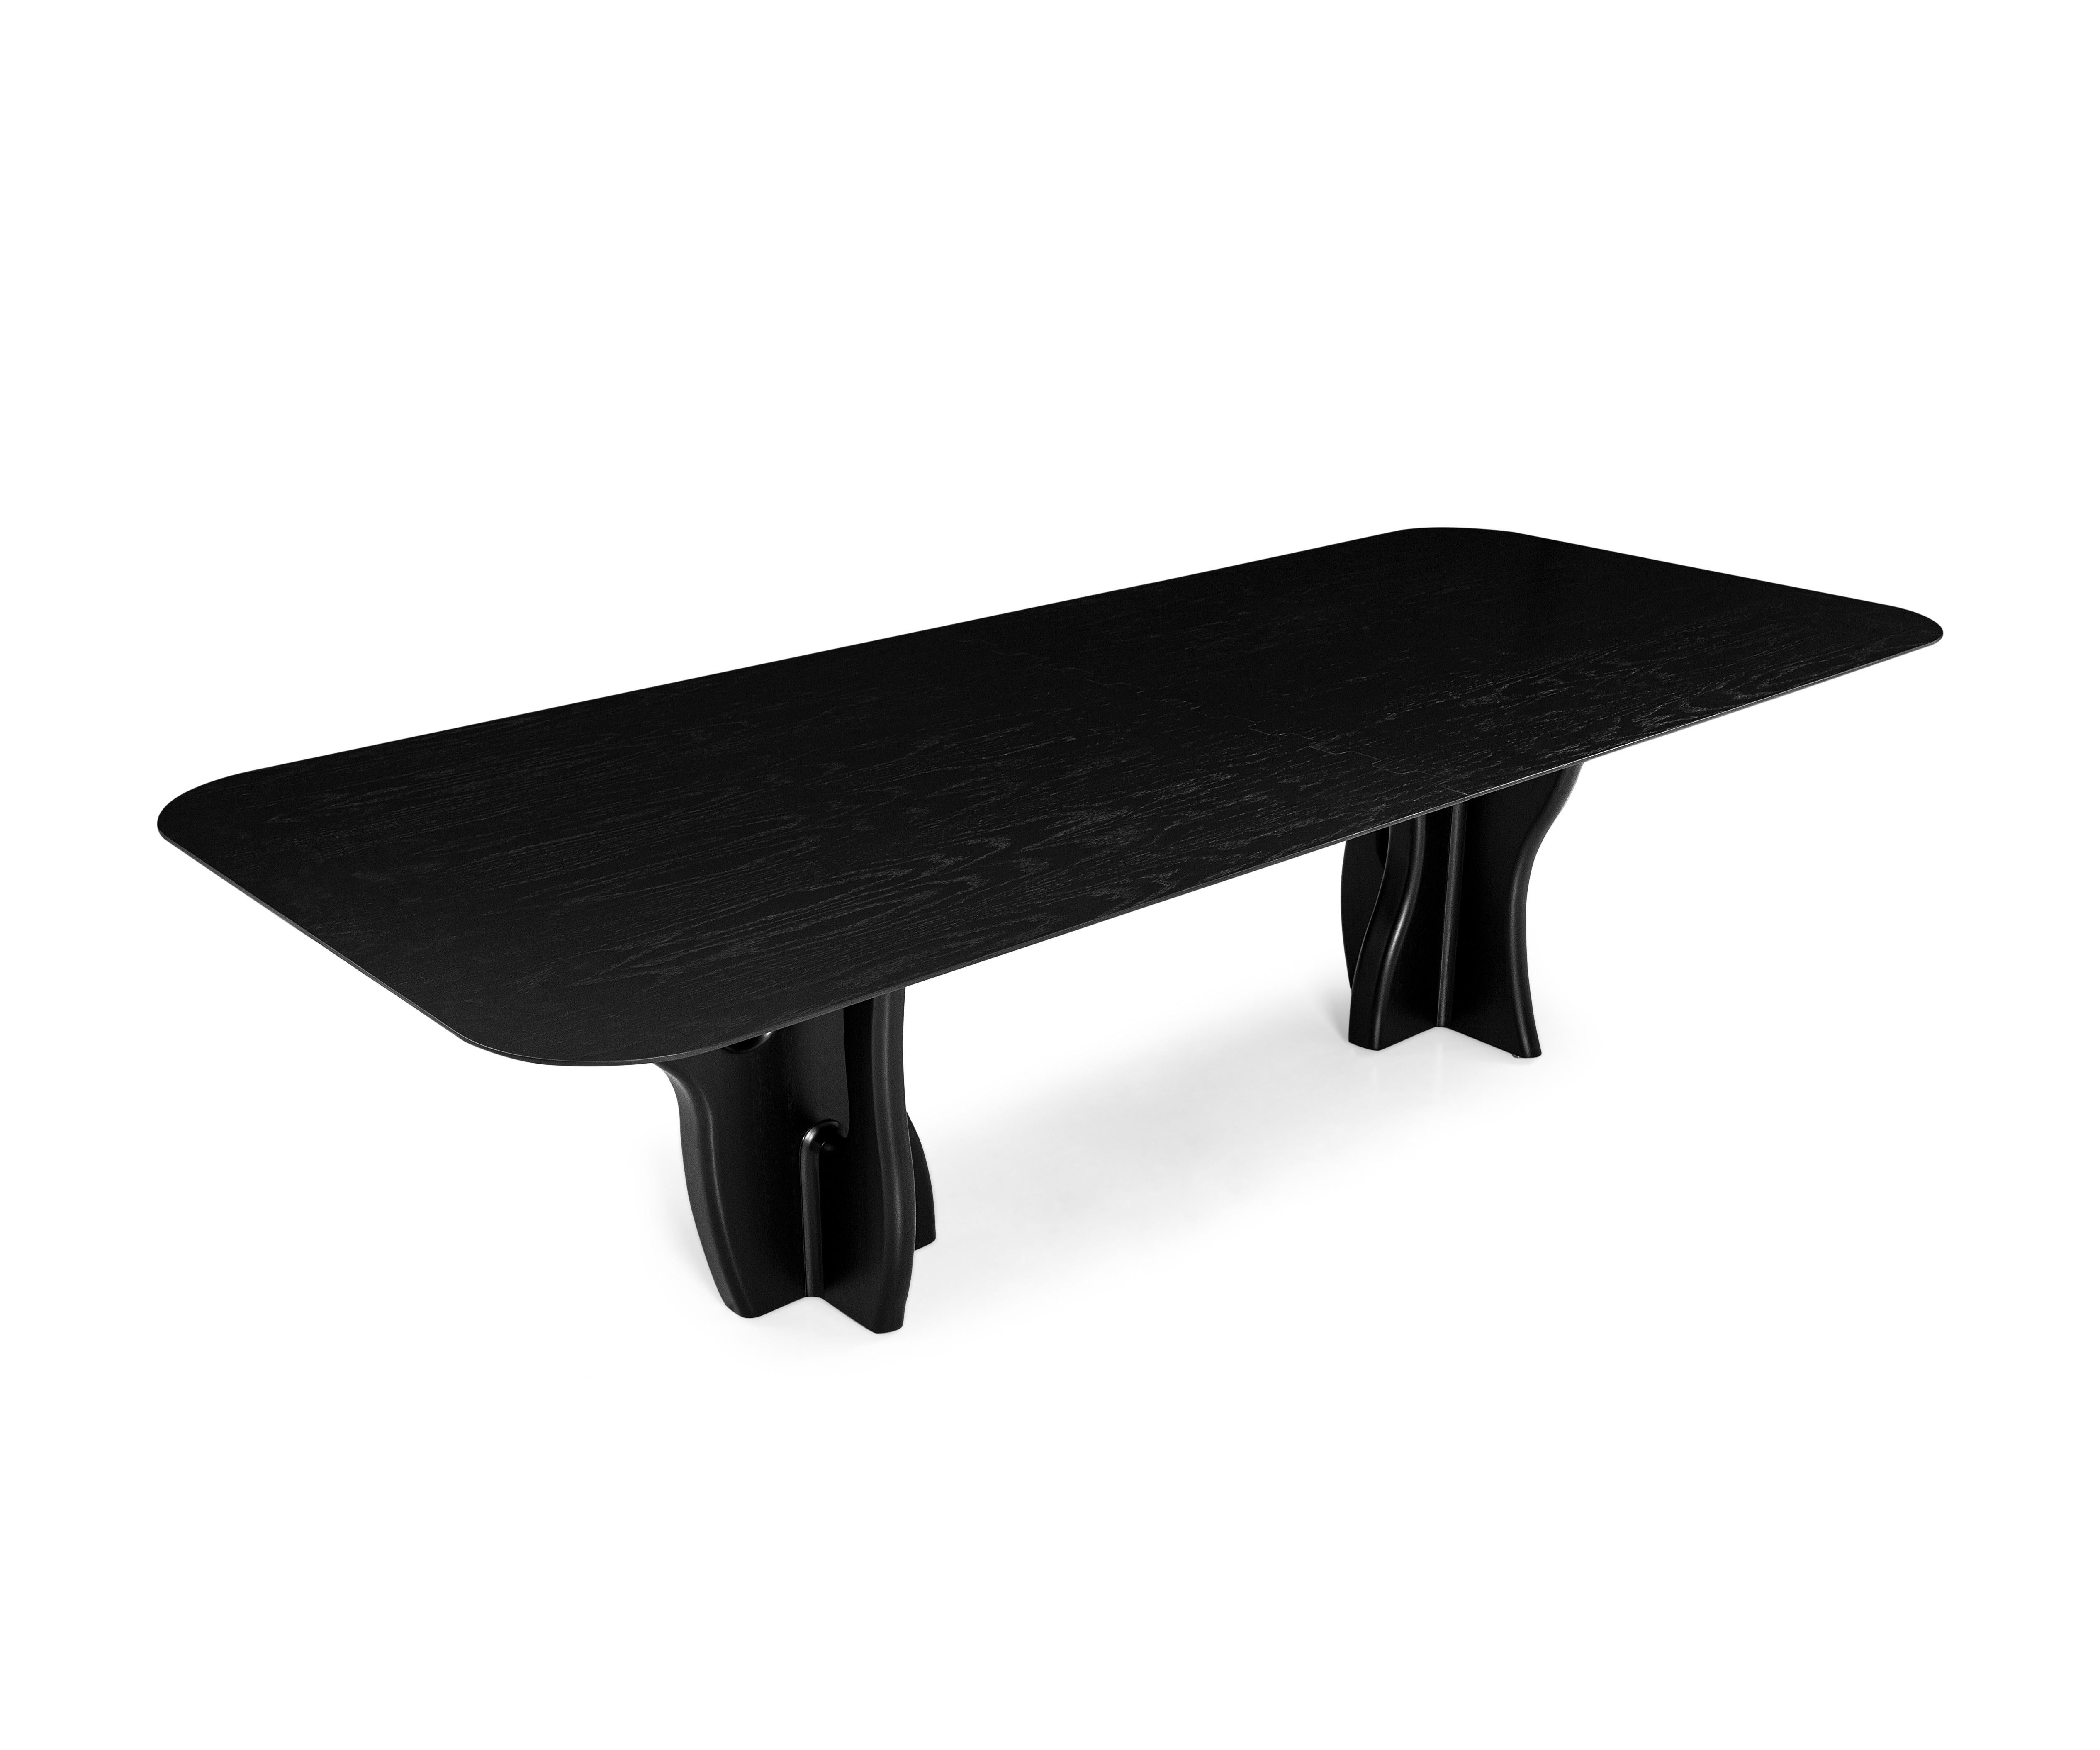 Brazilian Suma Dining Table with Black Oak Top and Organic Solid Wood Legs 86'' For Sale